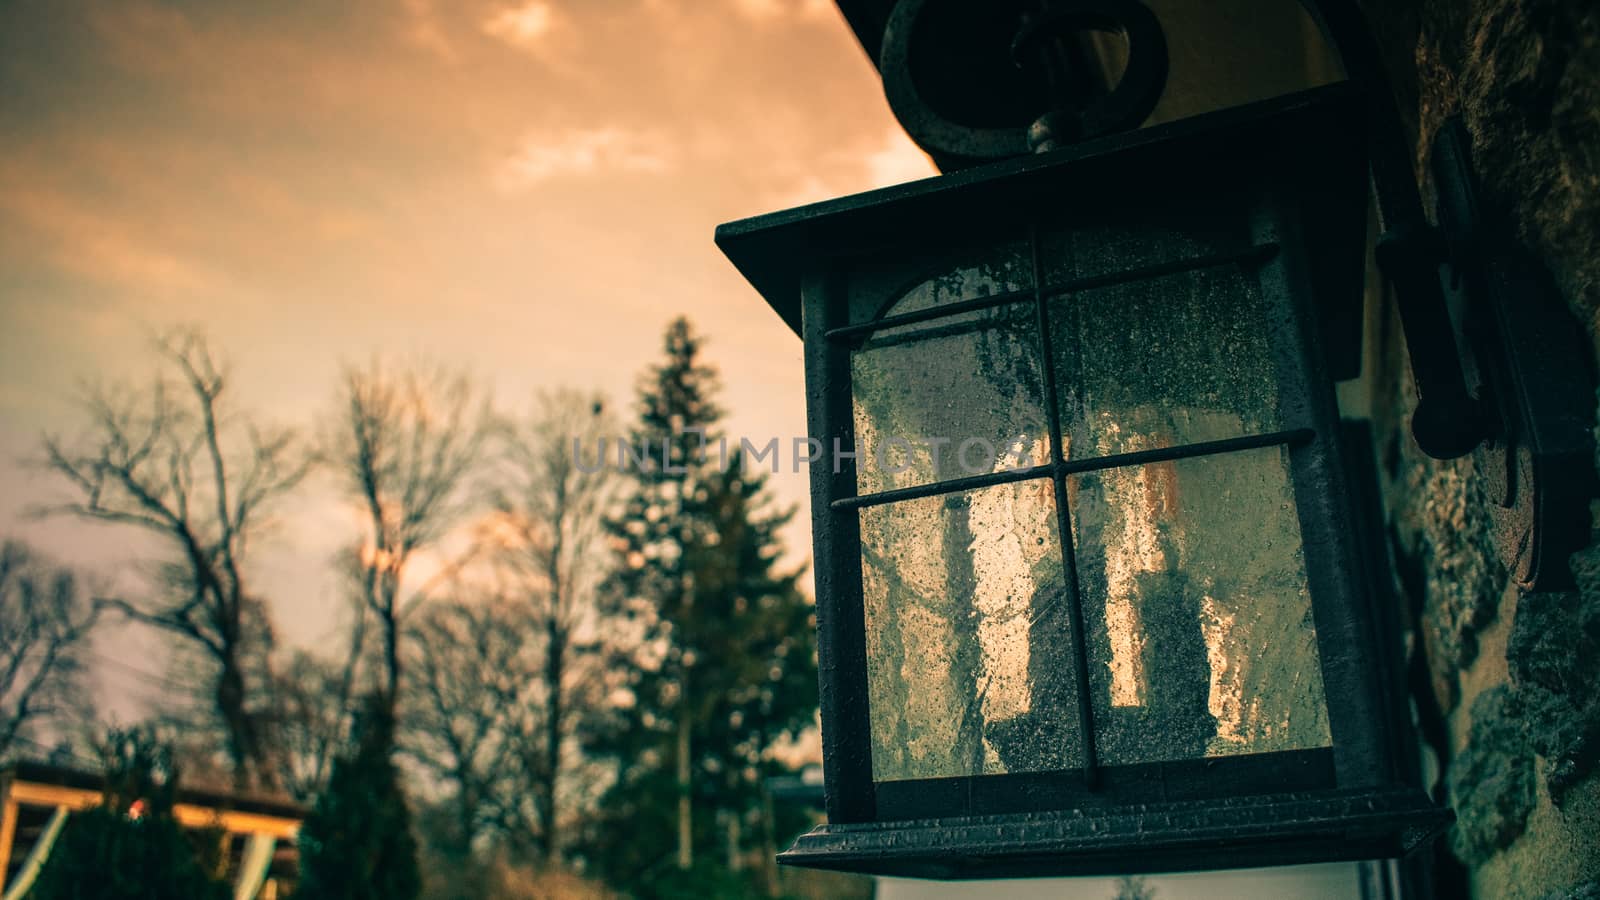 An Old-Fashioned Lamp Hanging on the Side of a Home by bju12290